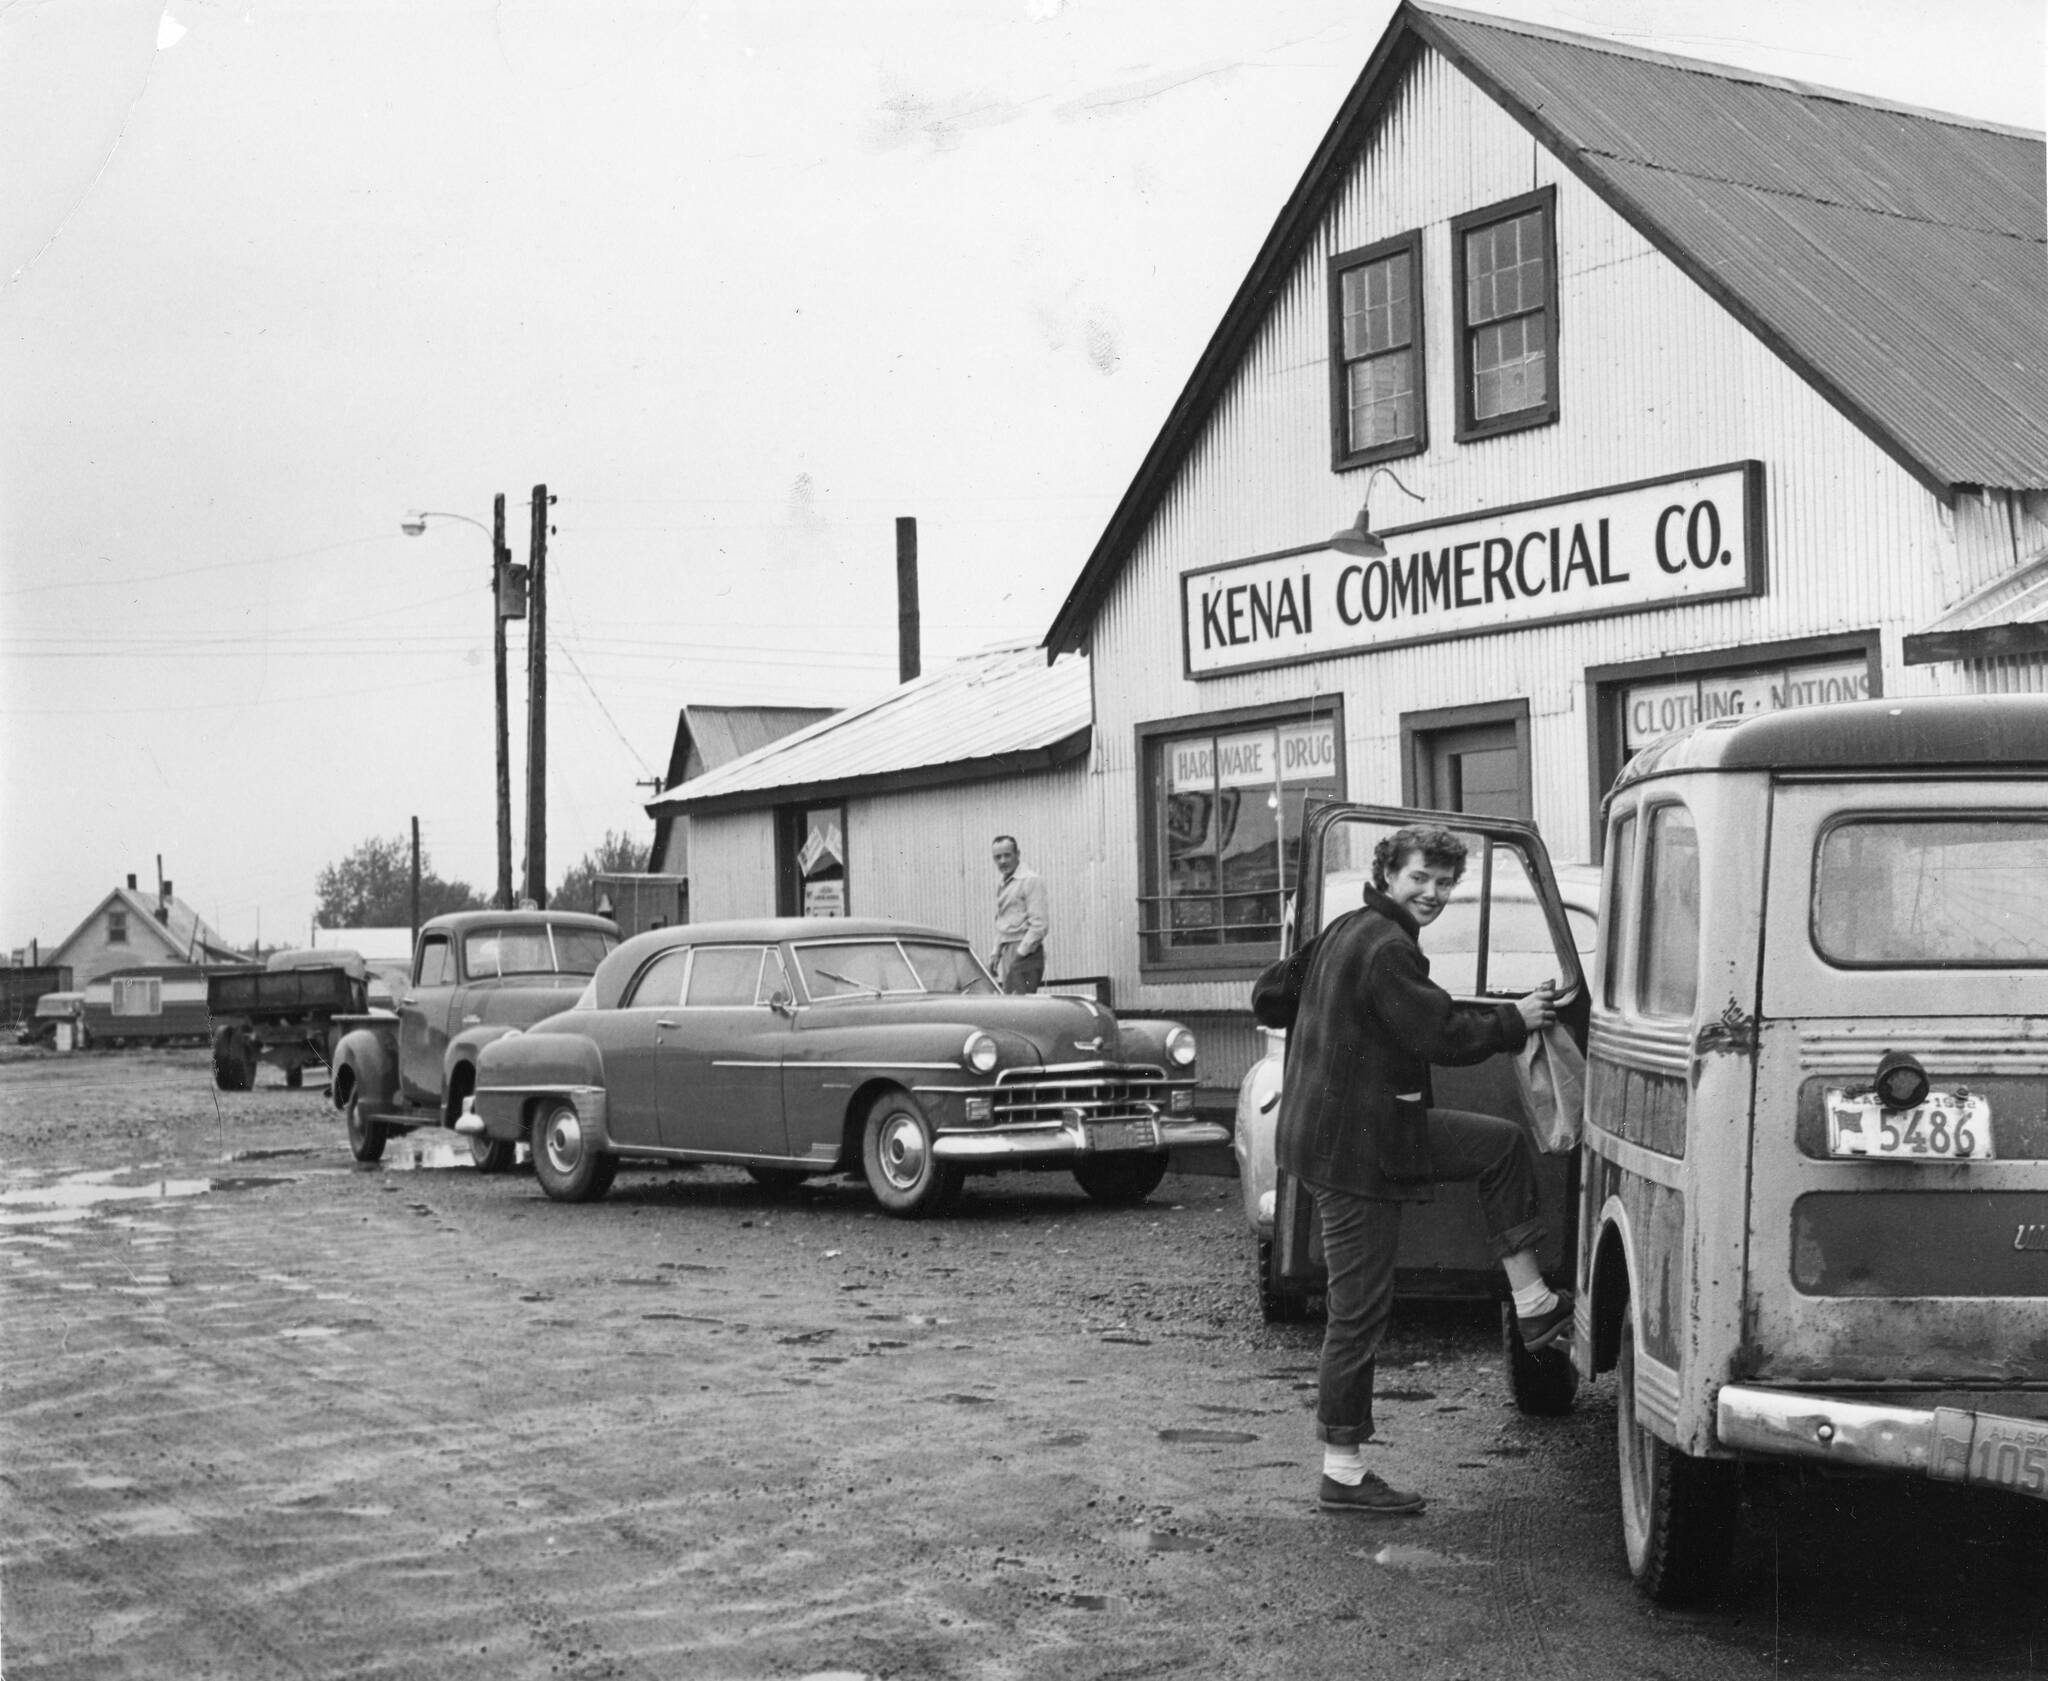 1954 photo by Bob and Ira Spring for Better Homes & Garden magazine
After doing business in the Kenai Commercial Company store, Rusty Lancashire climbs into family station wagon, with its sagging back bumper, to head for home.